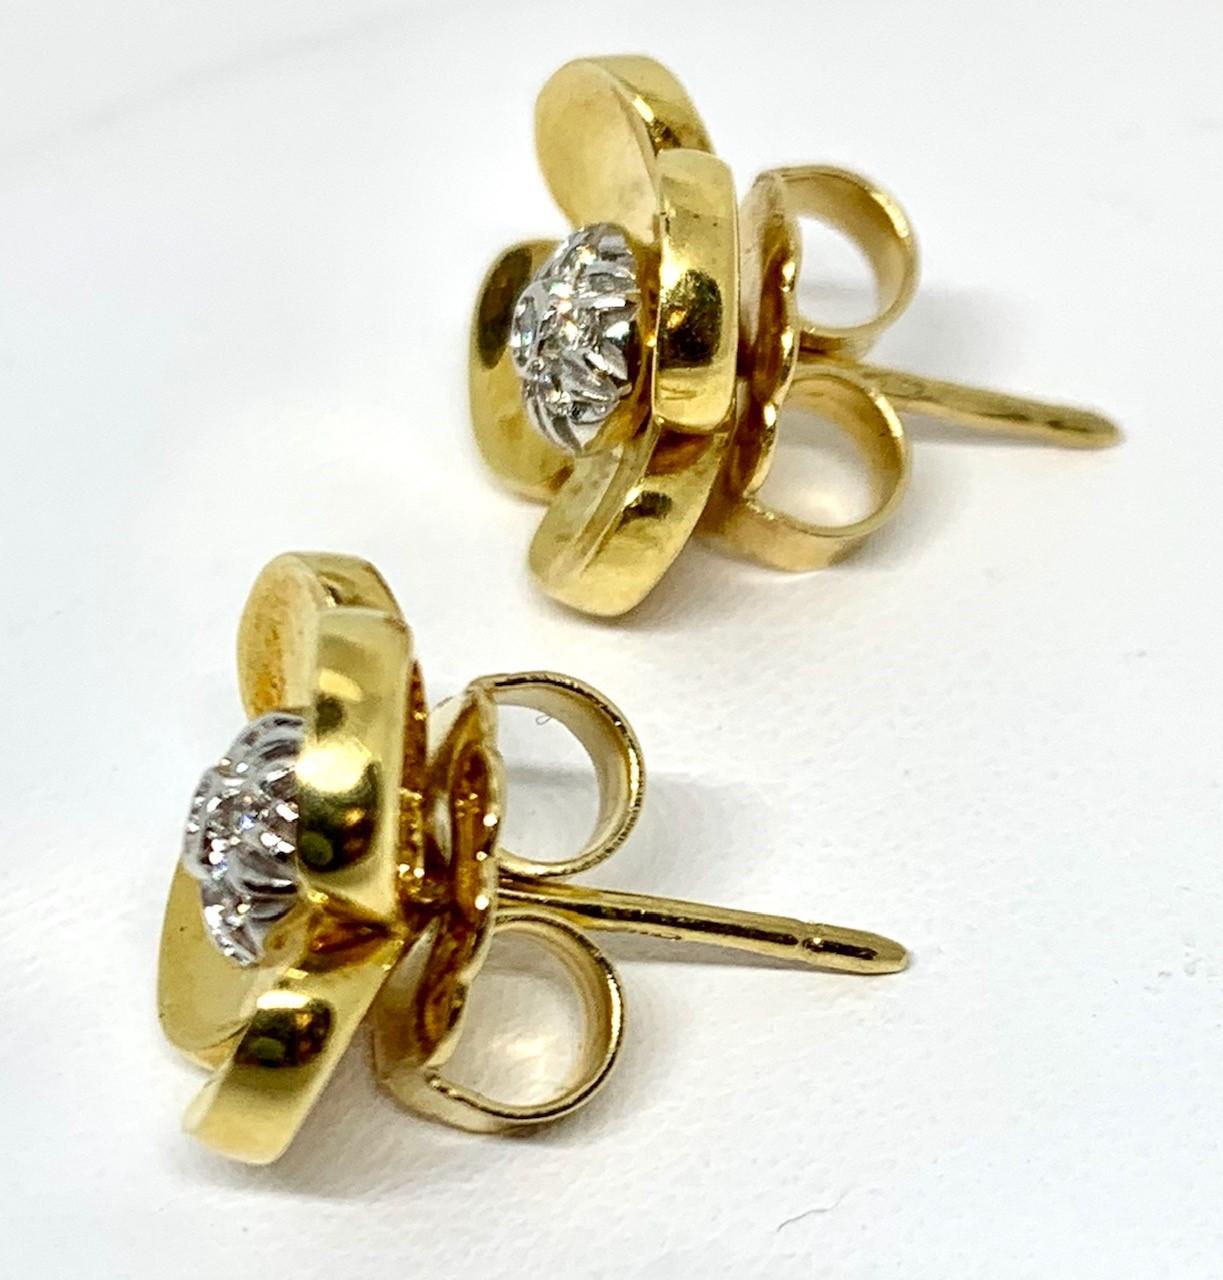 Positively blooming! These pretty floral earrings are a modern, yet classic, timeless design.  Fourteen round brilliant cut diamonds (.07 carats total) add a little sparkle.  Made of 18k yellow and white gold with ear posts and large backs. Every